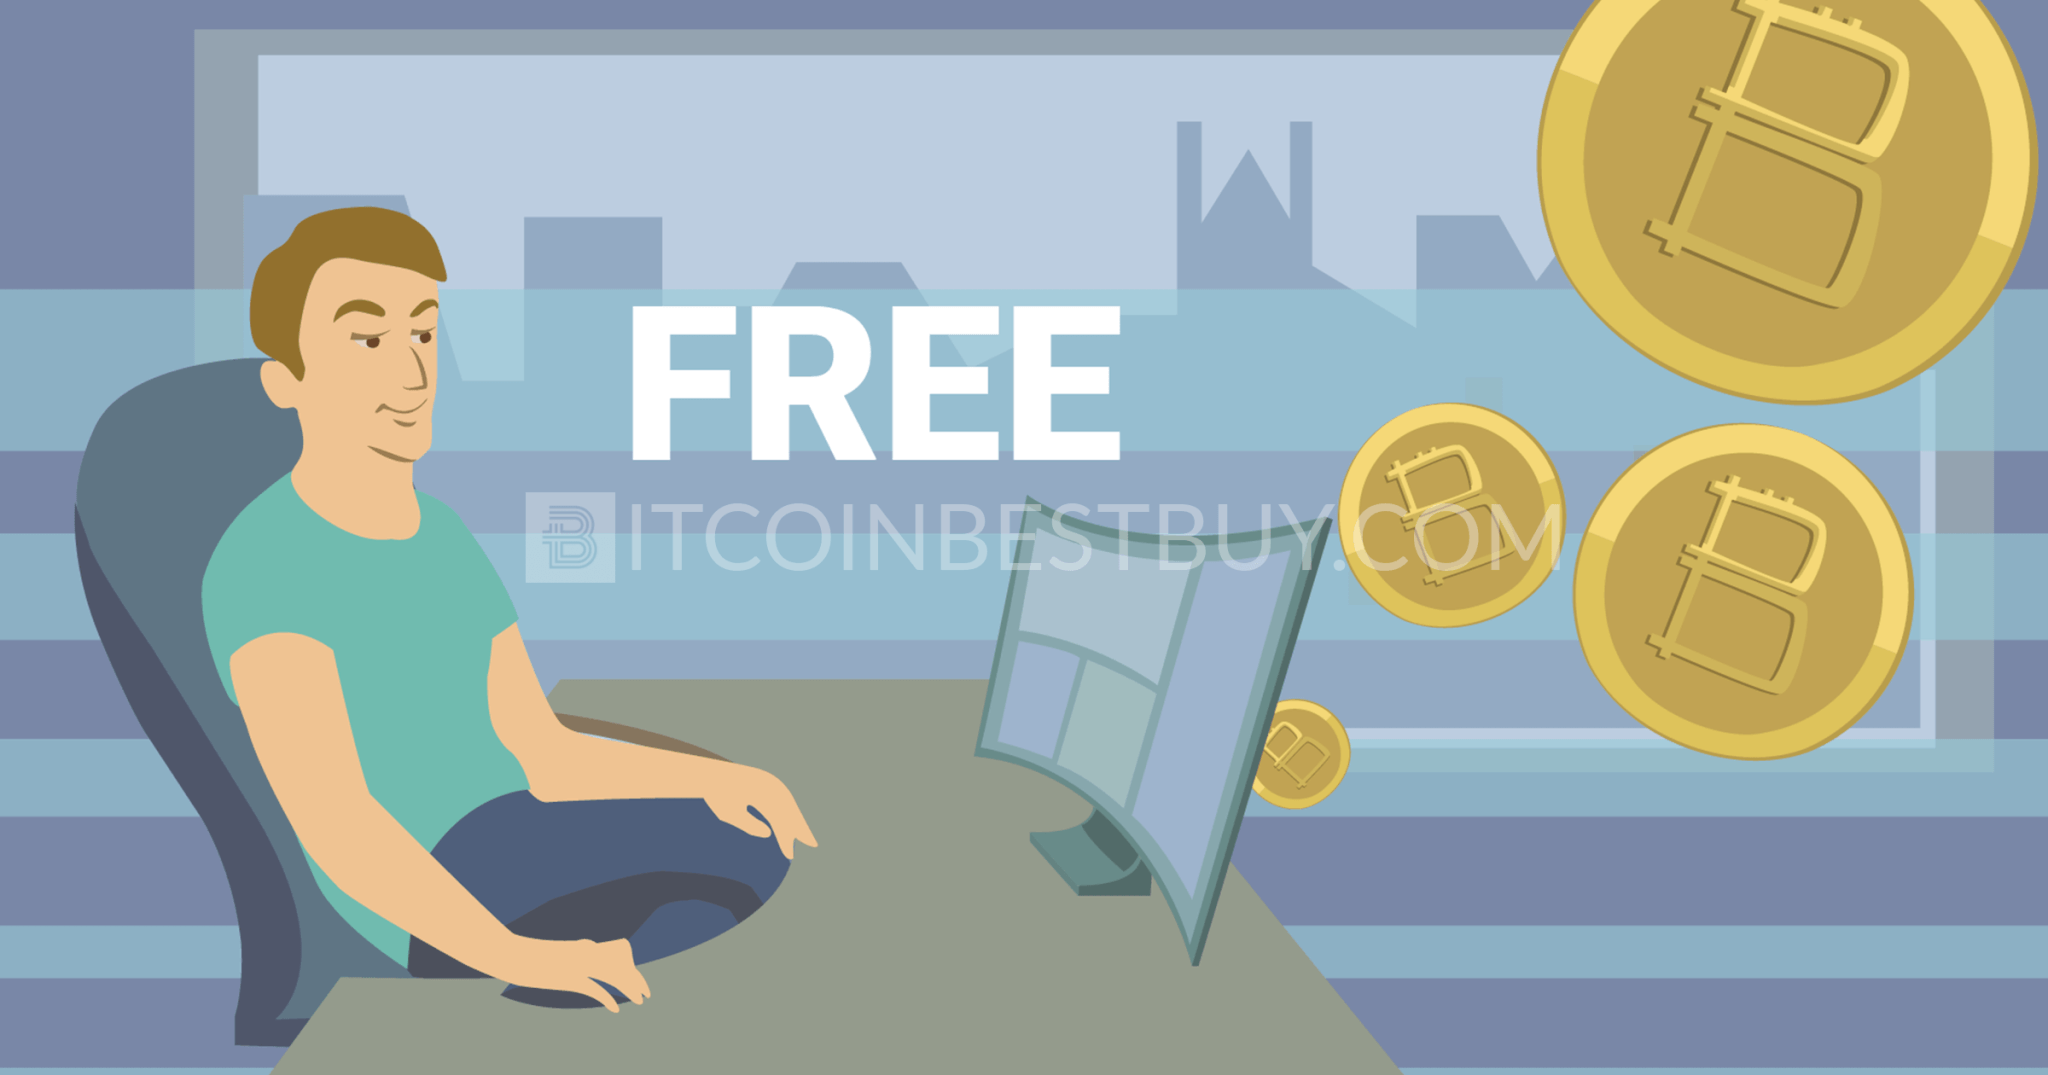 how can i earn bitcoins for free